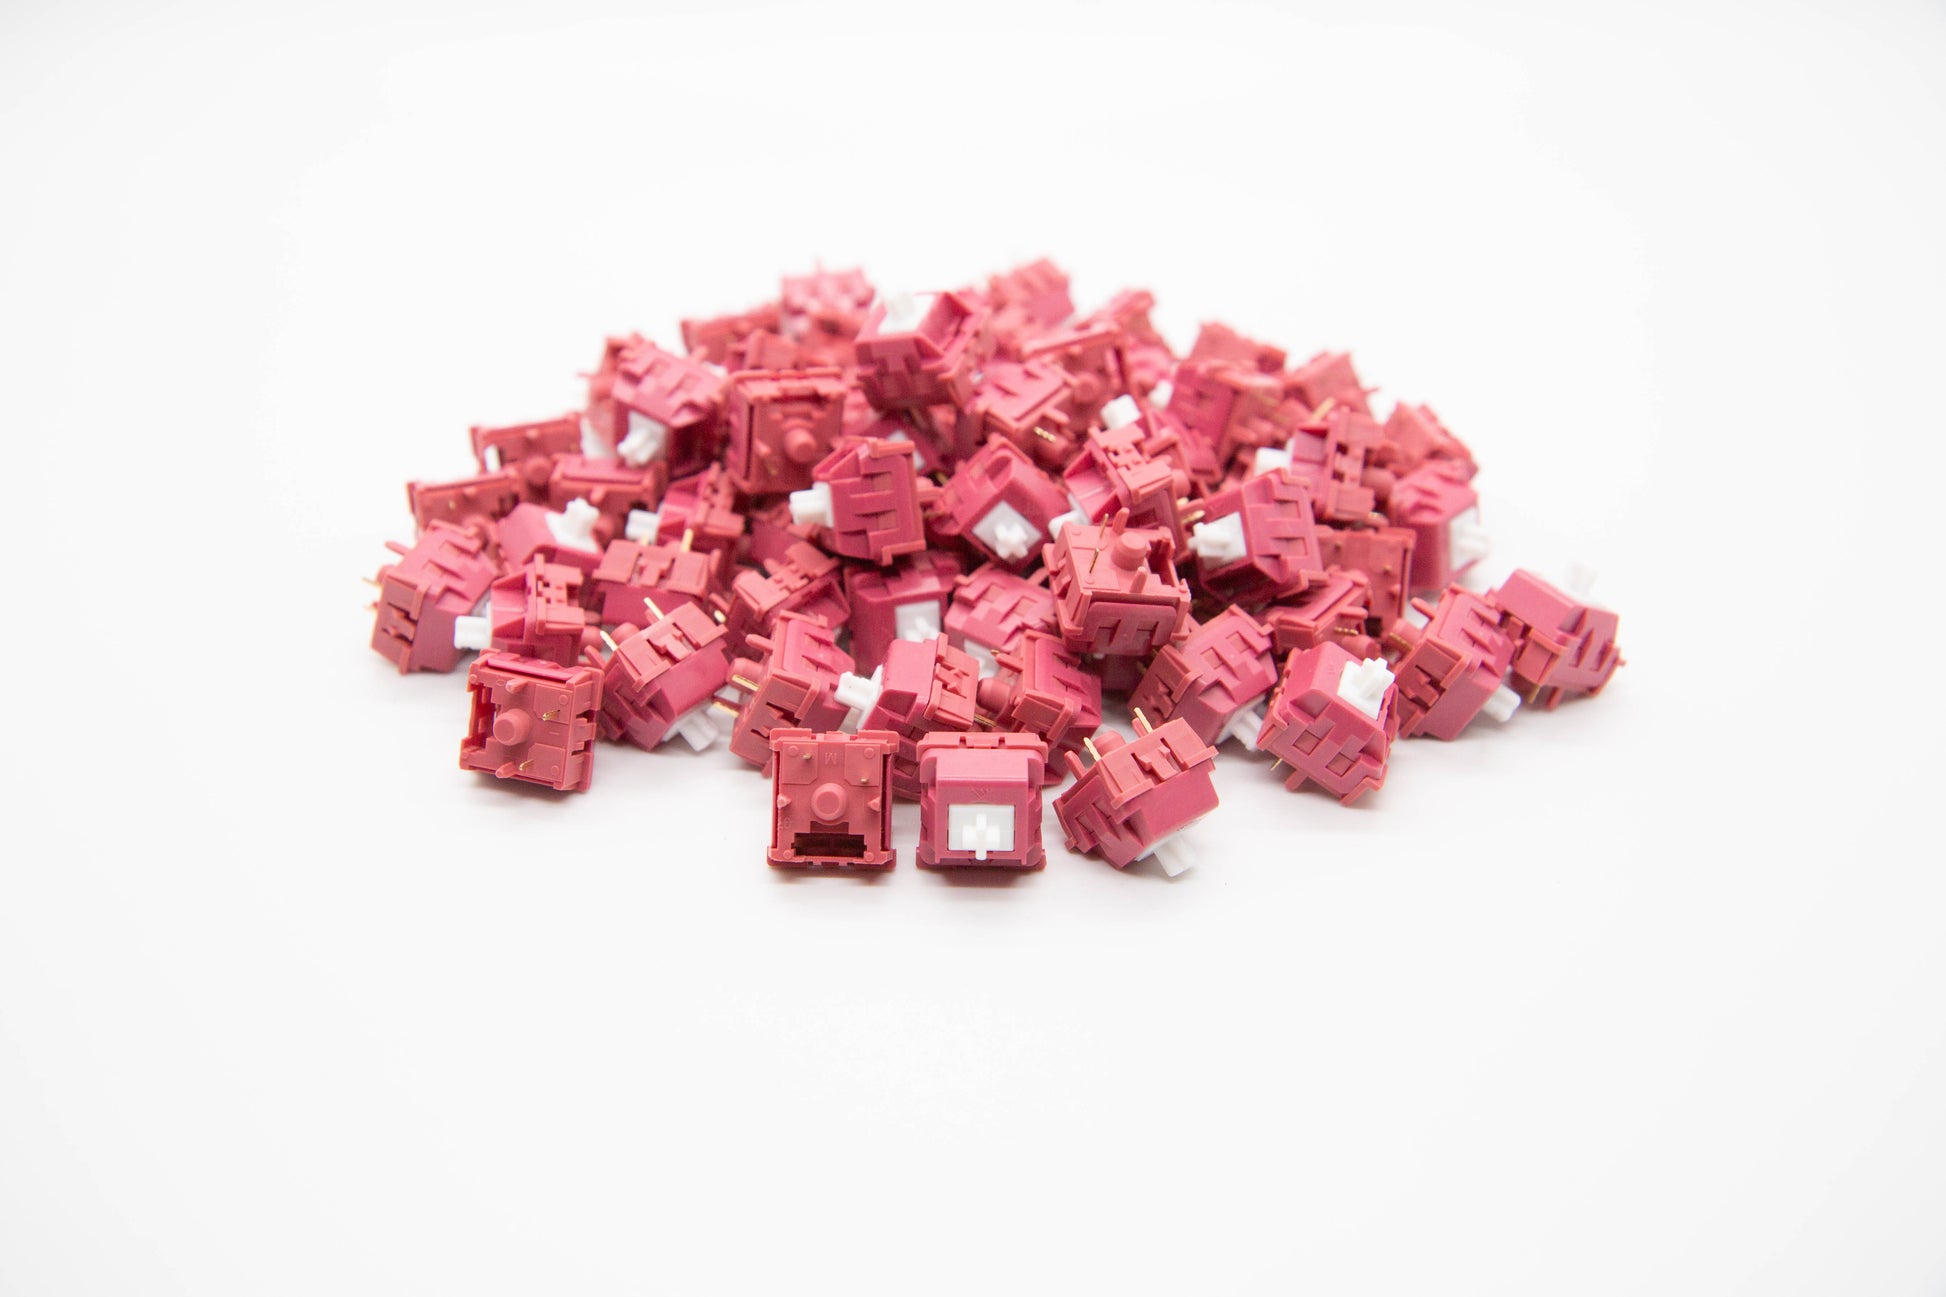 Close-up shot of a pile of KTT Grapefruit mechanical keyboard switches featuring maroon housing and white stems